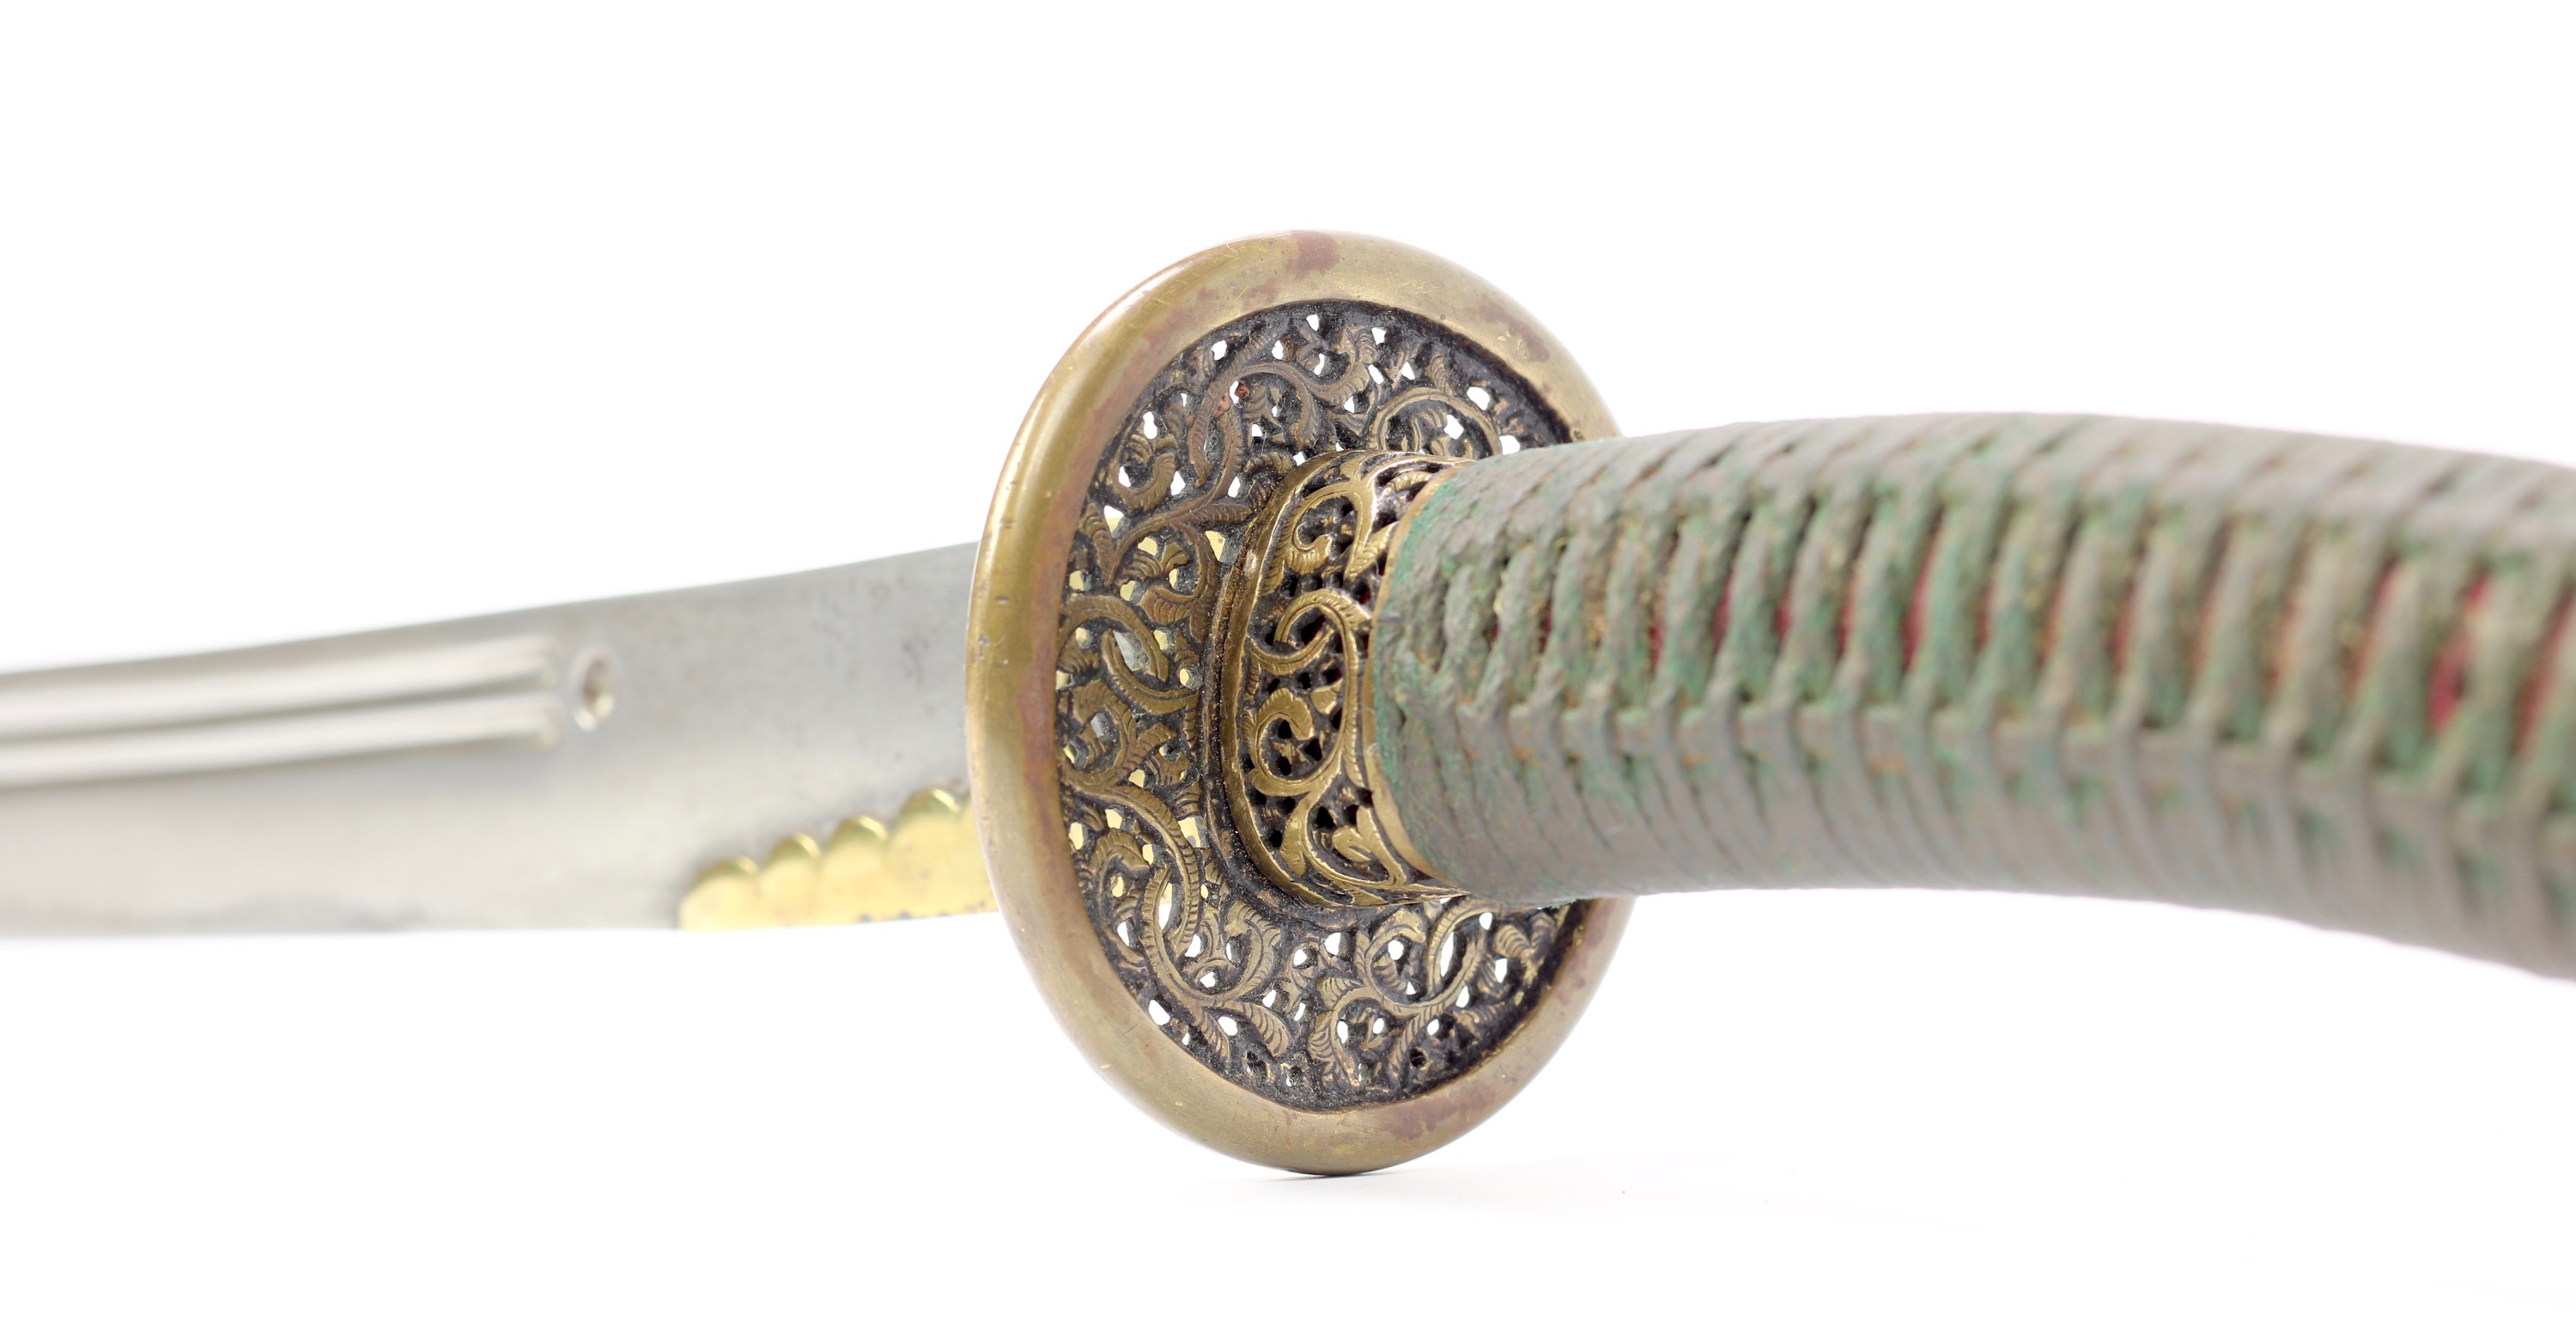 Late 18th / early 19th century sword guard